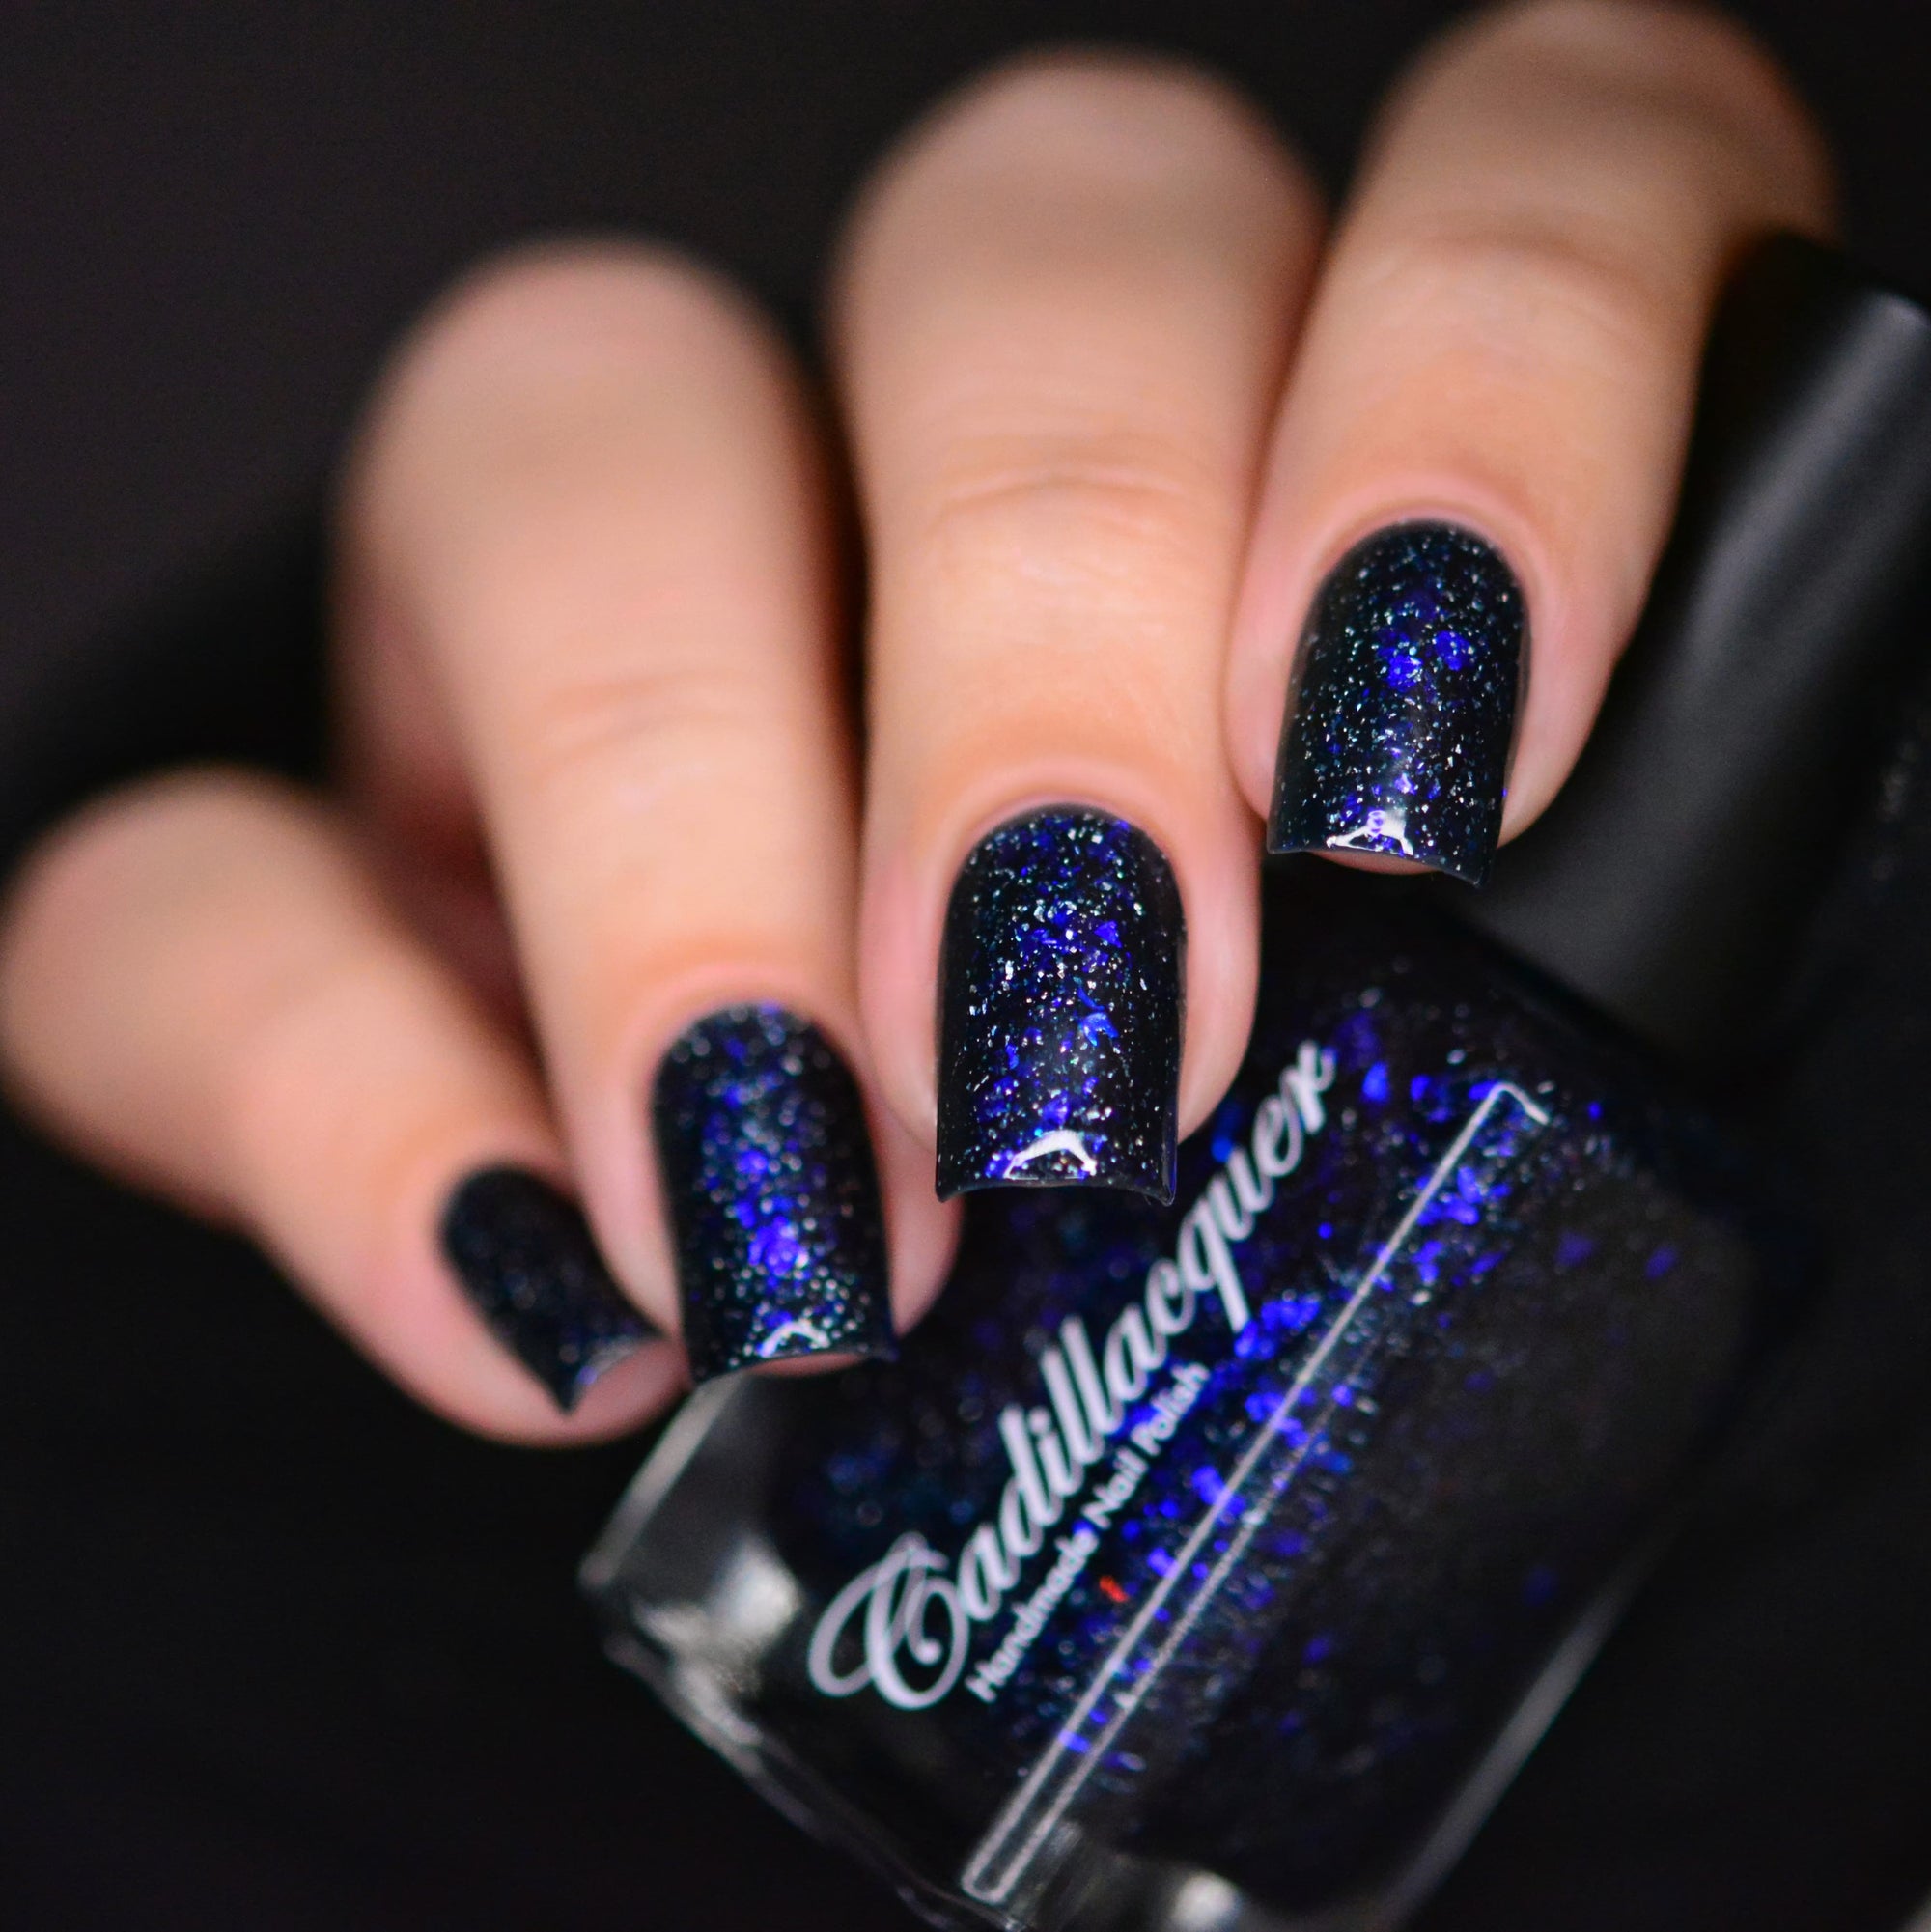 Cadillacquer - Store Exclusive - Winter Blues